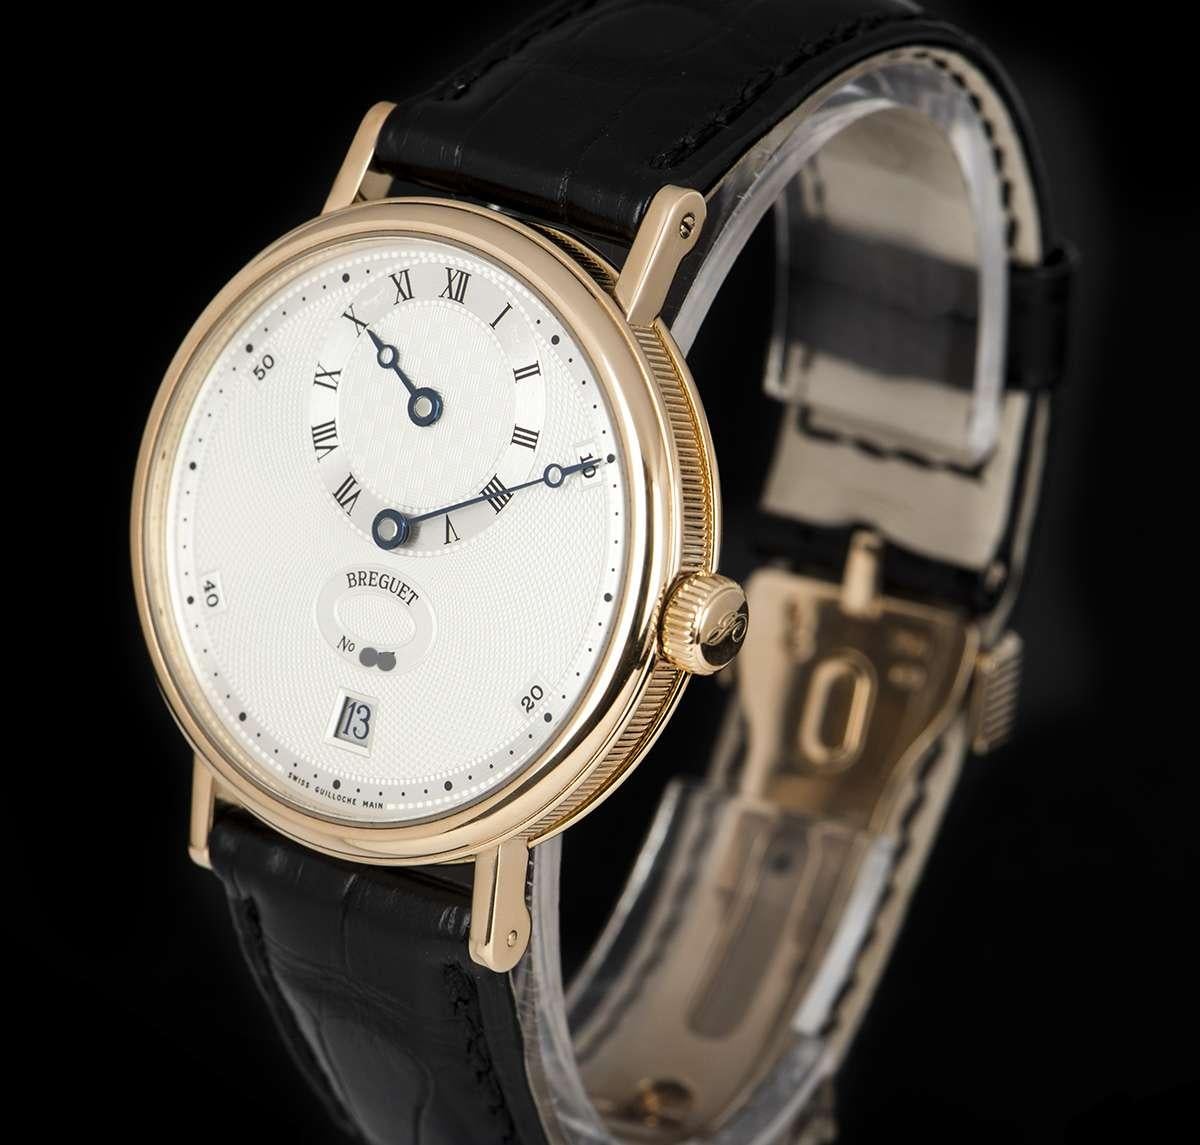 An 18k Rose Gold Classique Regulator Gents Wristwatch, silver dial hand engraved on a rose engine, silver off-centre chapter ring with roman numerals indicating the hour, date at 6 0'clock, a silver chapter ring on the outer edge of the dial